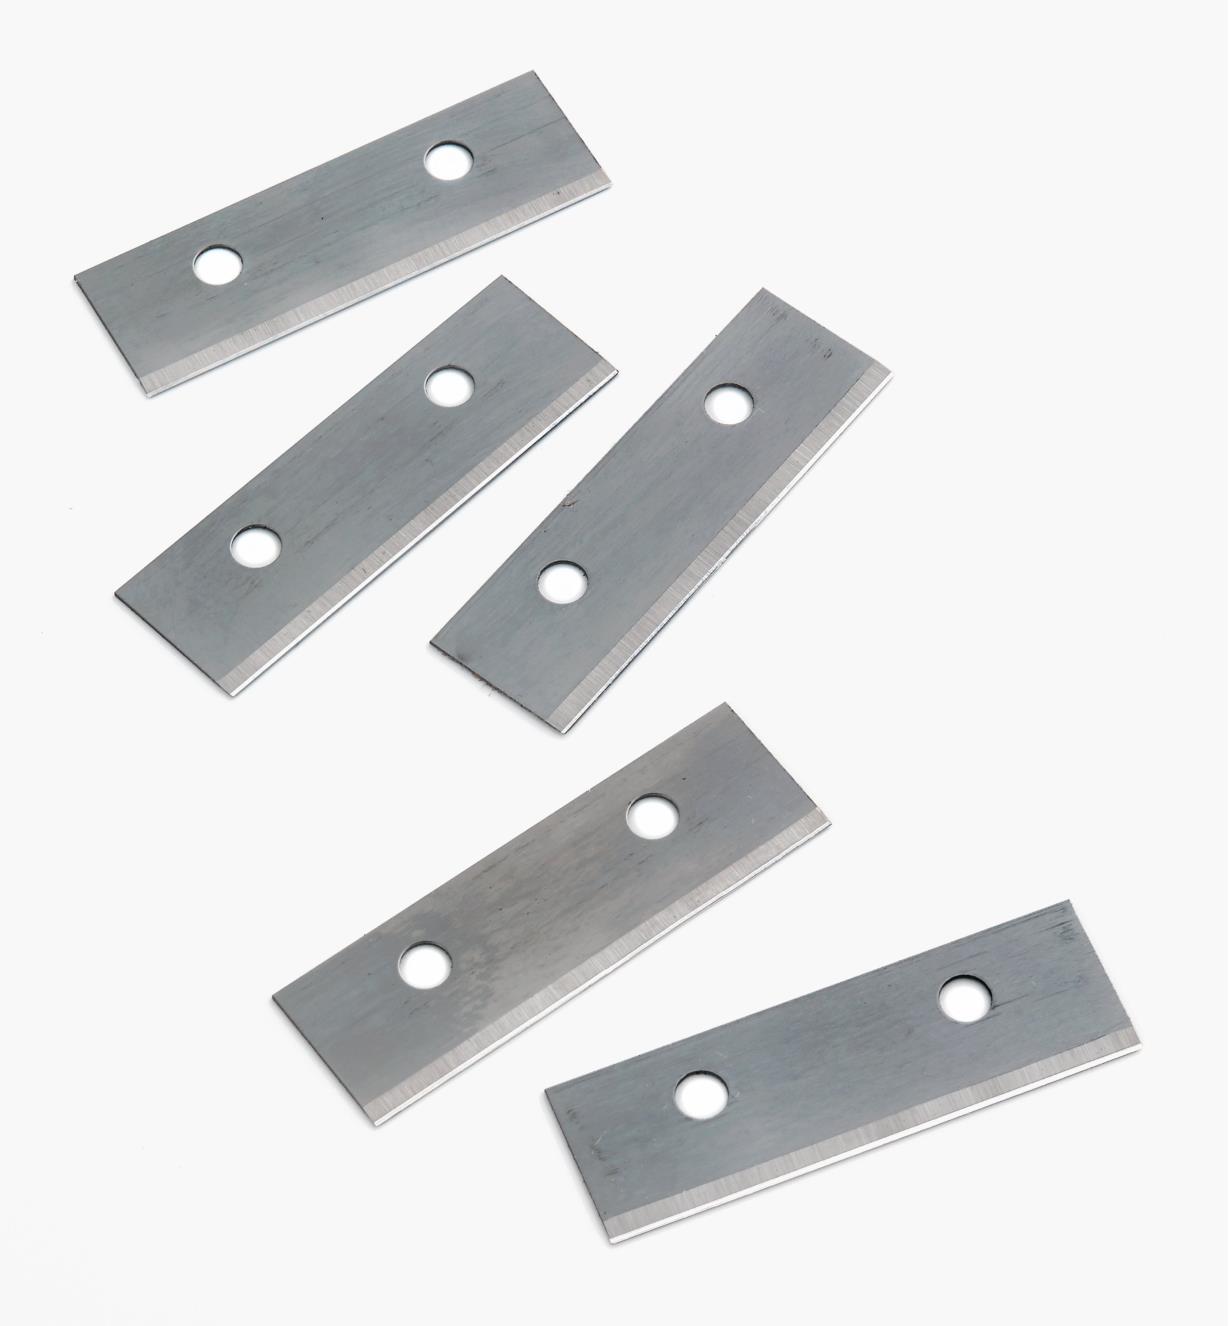 97K0804 - Replacement Blades for Leather Strap Cutter, pkg. of 5